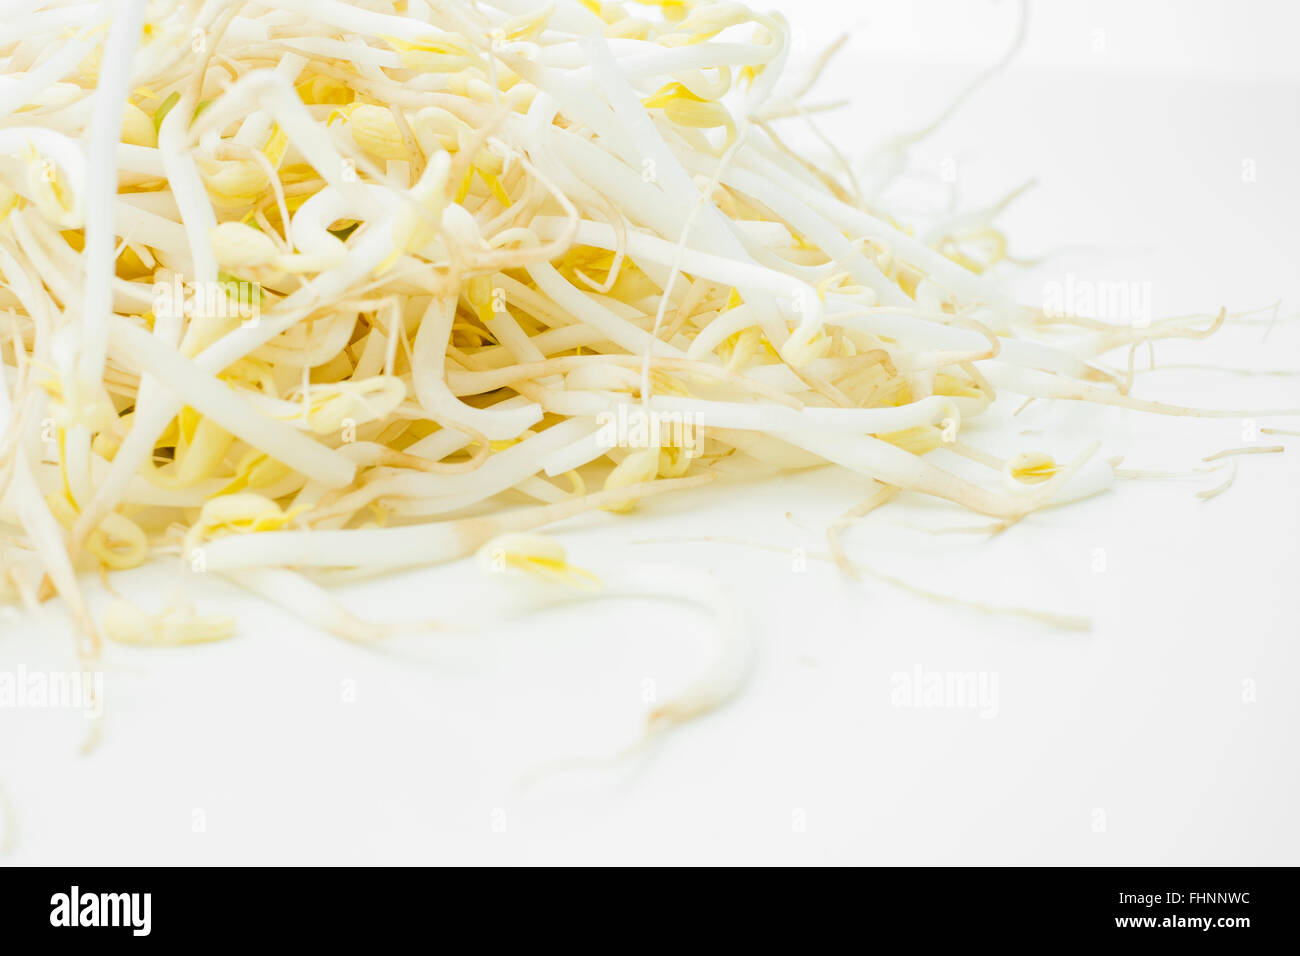 Bean sprouts on a white background Stock Photo